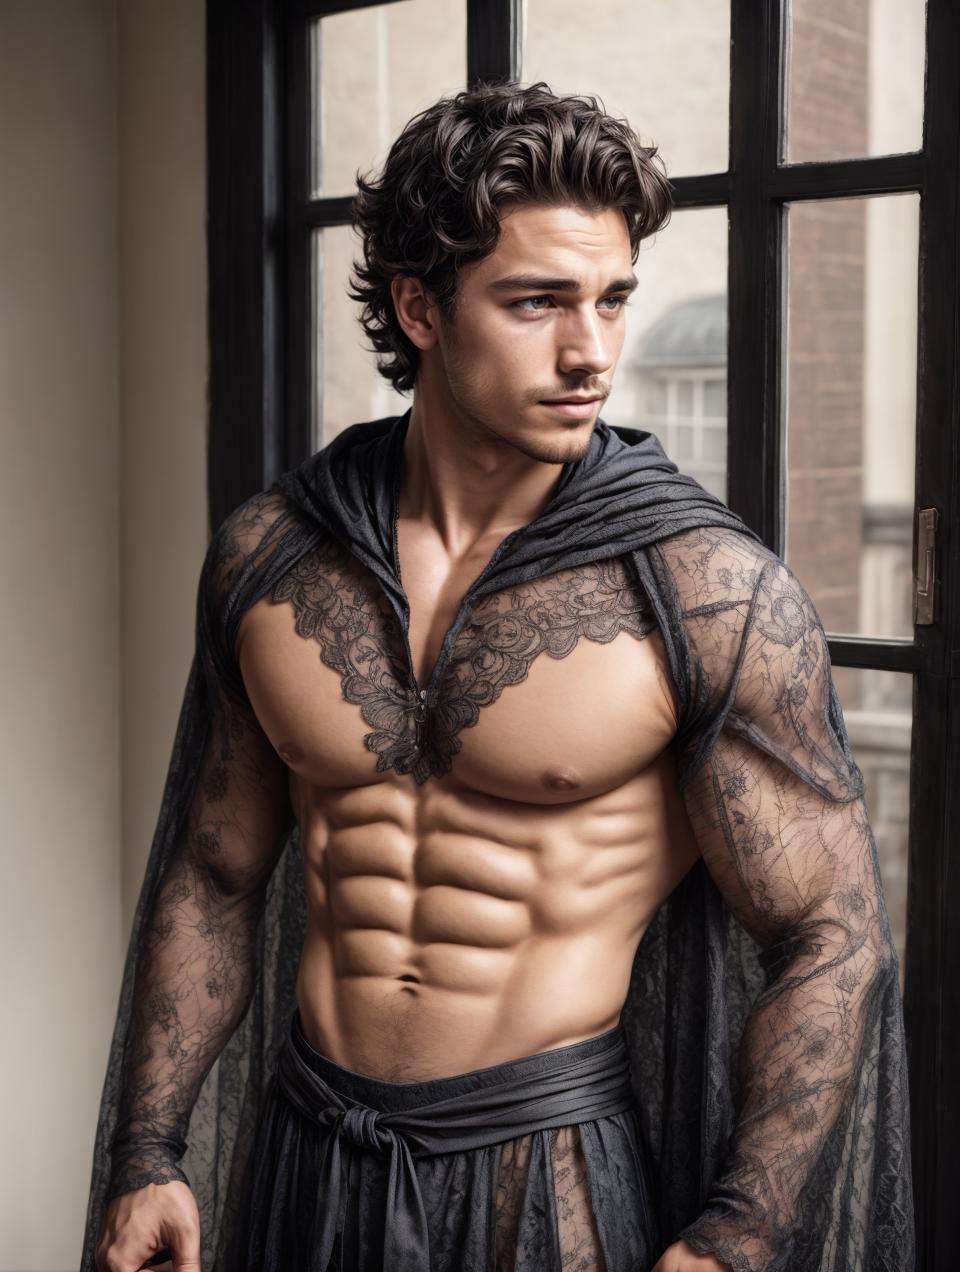 (GS-Masculine:1), (one male), (front side view), close up shot, (looking at viewer), Very detailed youthful face, heroic, detailed realistic open eyes, (muscular:1.5), bodybuilder, big muscles, hyper pecs, hairy pecs, hypermuscle, wide shoulders, short midsection, (slight smile). matty healy, robert sheehan, timothee chalamet, jon bellion, josh hutcherson, pedro pasca, brenton thwaites, dacre montgomery, miles teller, rami malek, mena massoud, avan jogia, freddie stroma, sam claflin, taron egerton, joe keery, harry styles, orlando bloom, arnold schwarzenegger, (freckles), tan glowing skin, brown eyes, <lora:Clothing - Lace Armor:0.5>, lac34rmor, lace, see-through, long sleeved laced robes with a cloak cape, <lora:more_details:1>